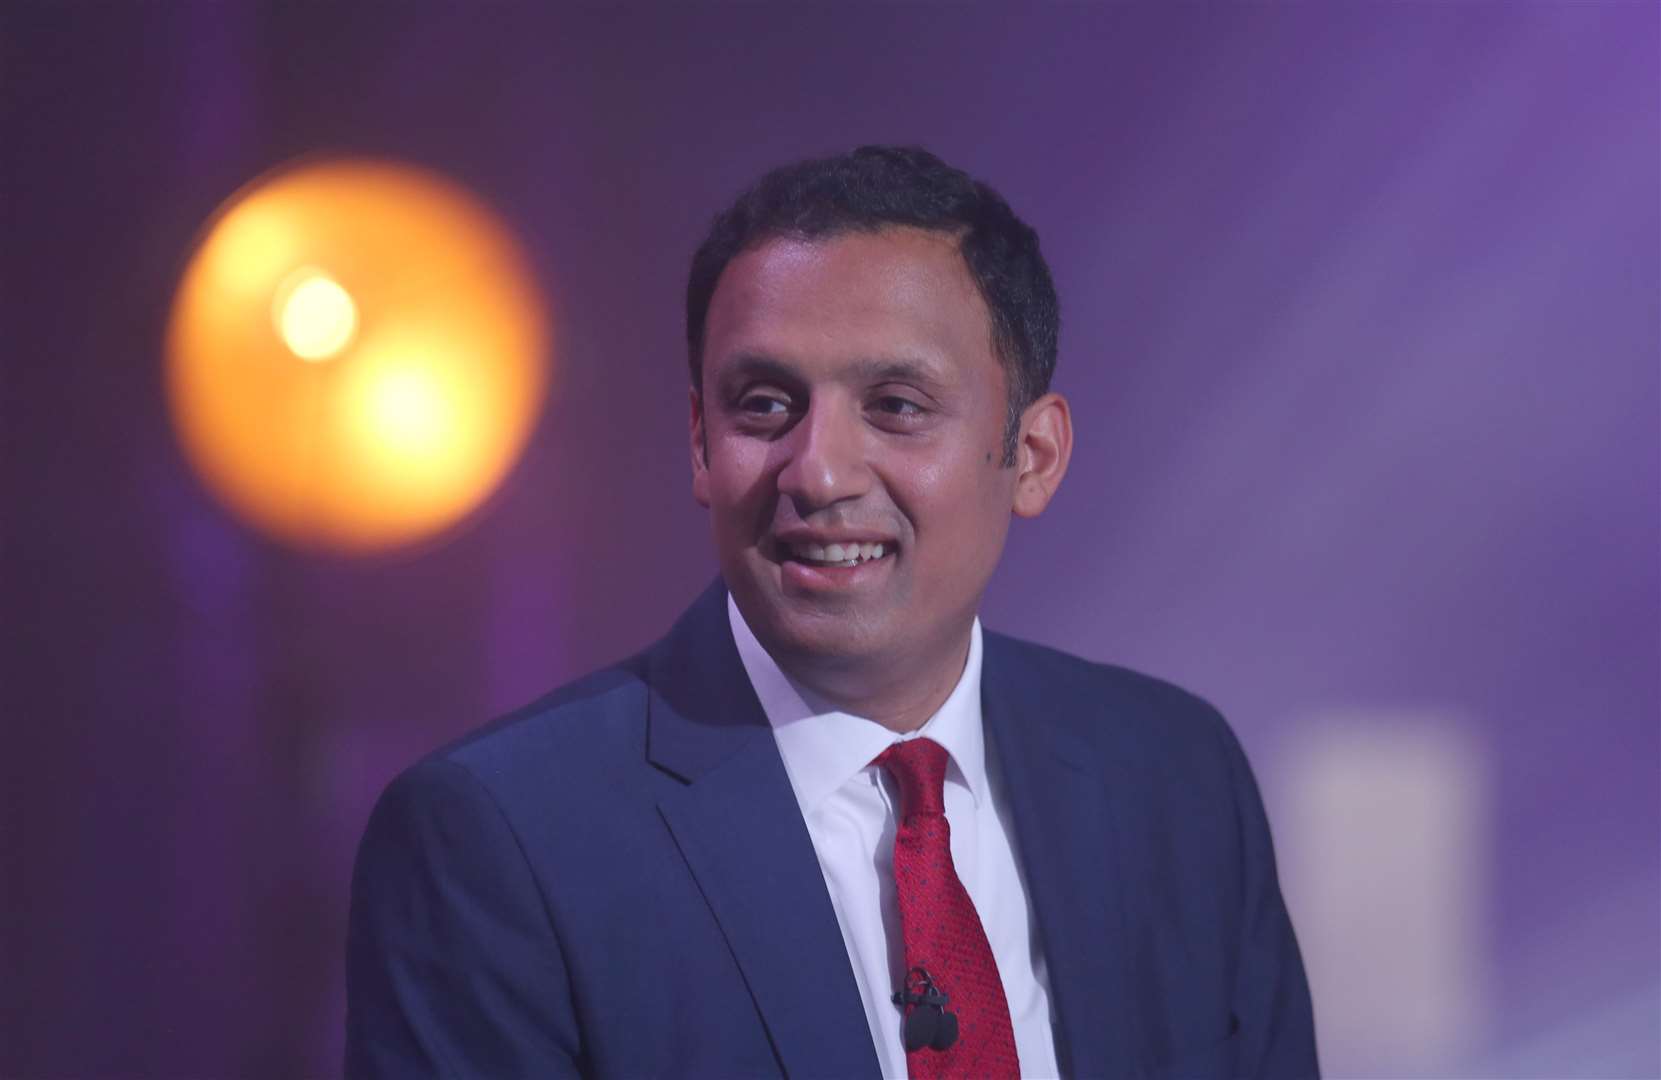 Scottish Labour leader Anas Sarwar is to address his party’s Brighton conference on Monday. (Andrew Milligan/PA)